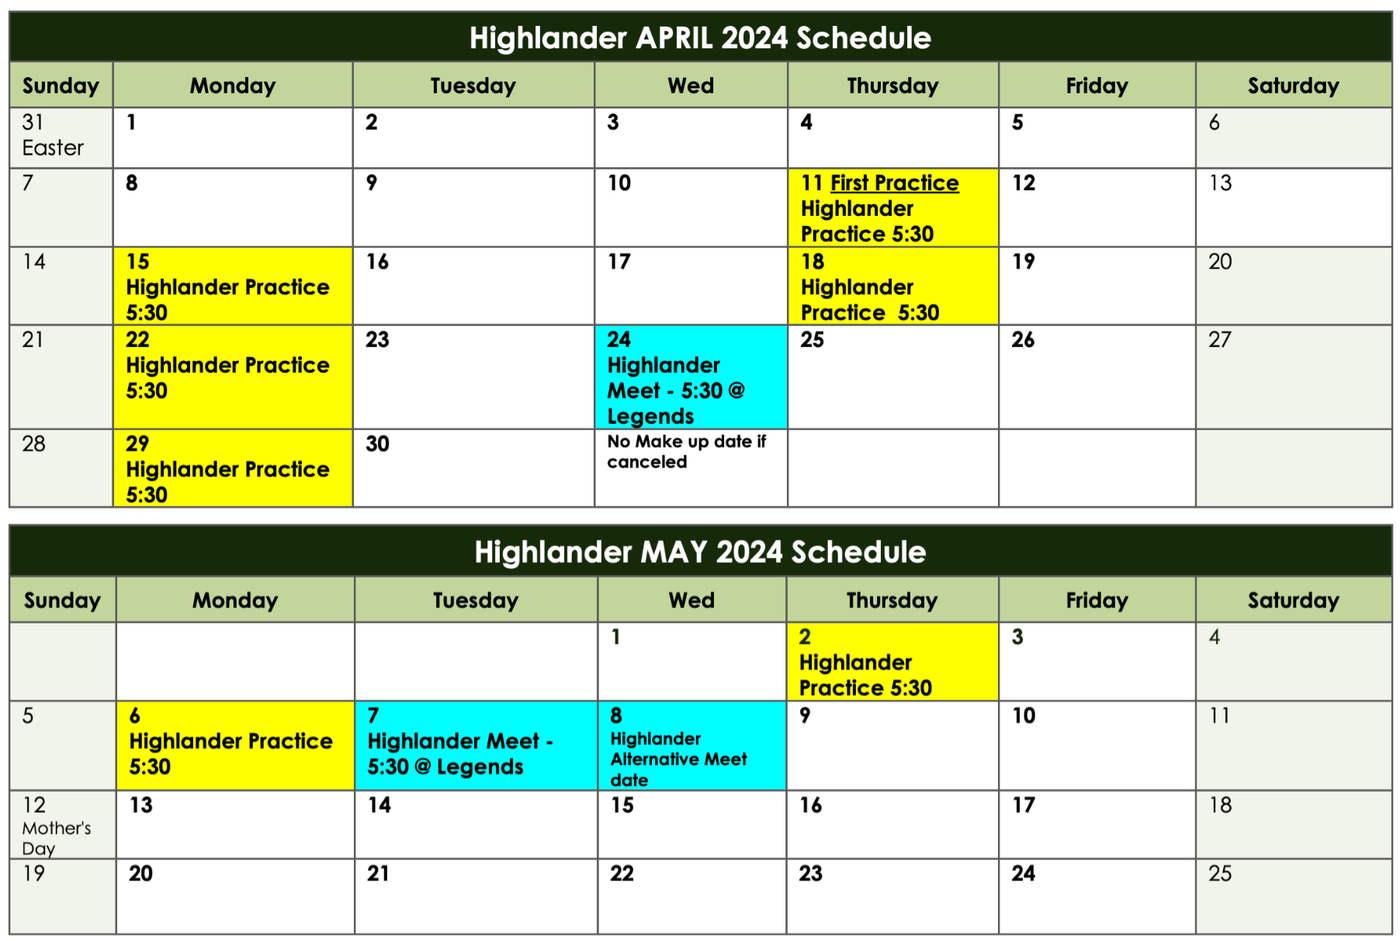 A calendar showing the highlander April,  and may schedules